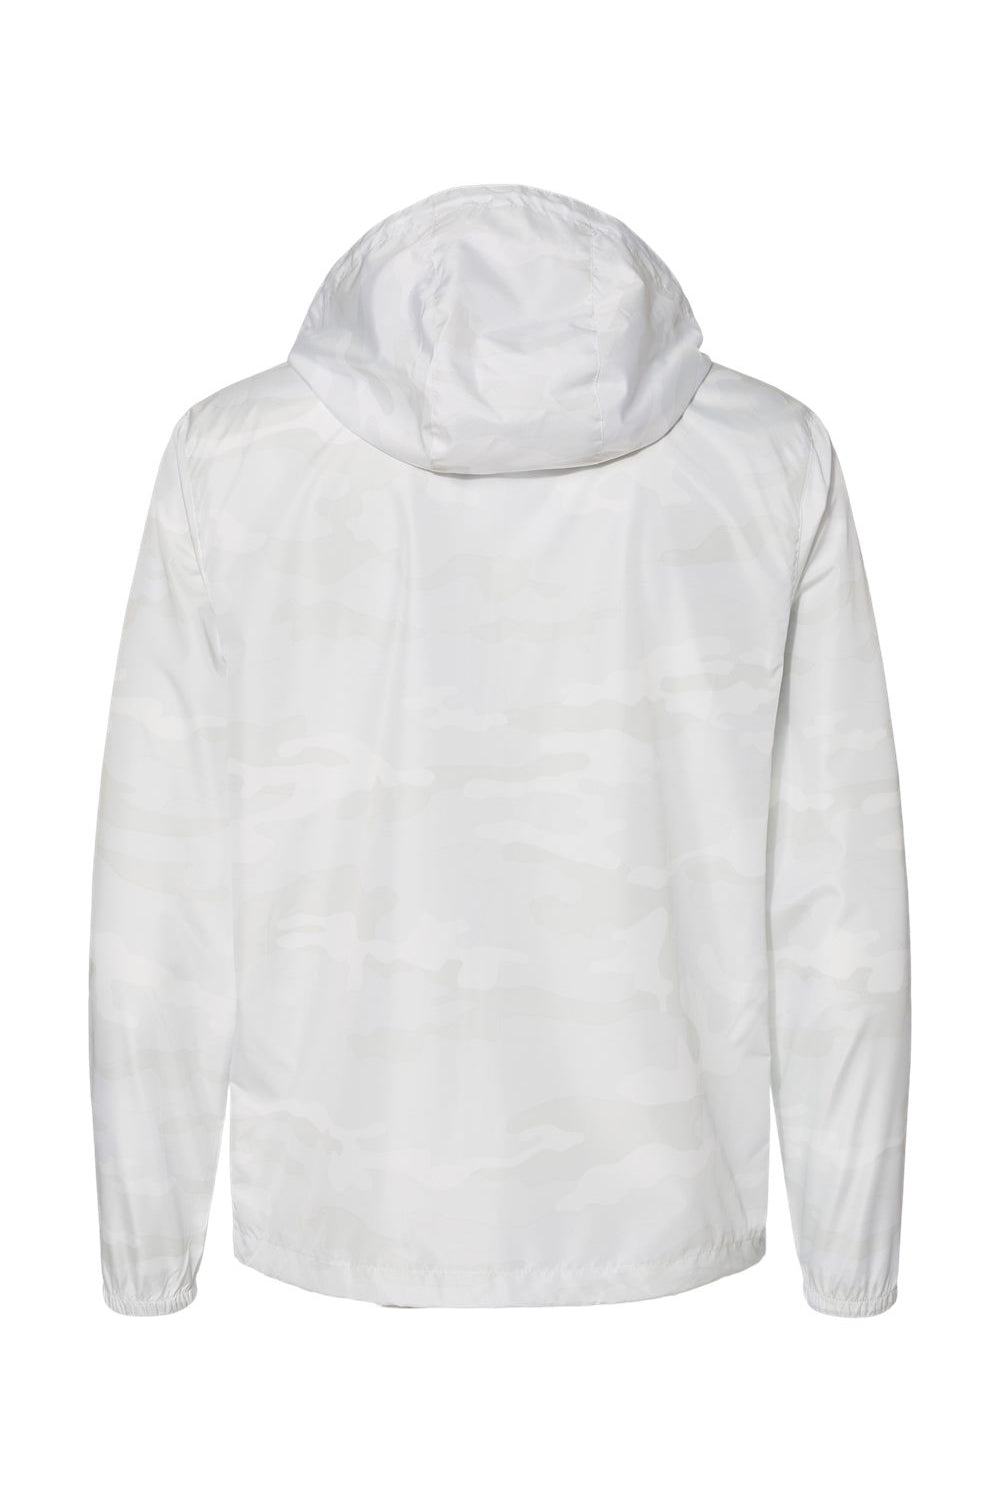 Independent Trading Co. EXP54LWZ Mens Full Zip Windbreaker Hooded Jacket White Camo Flat Back